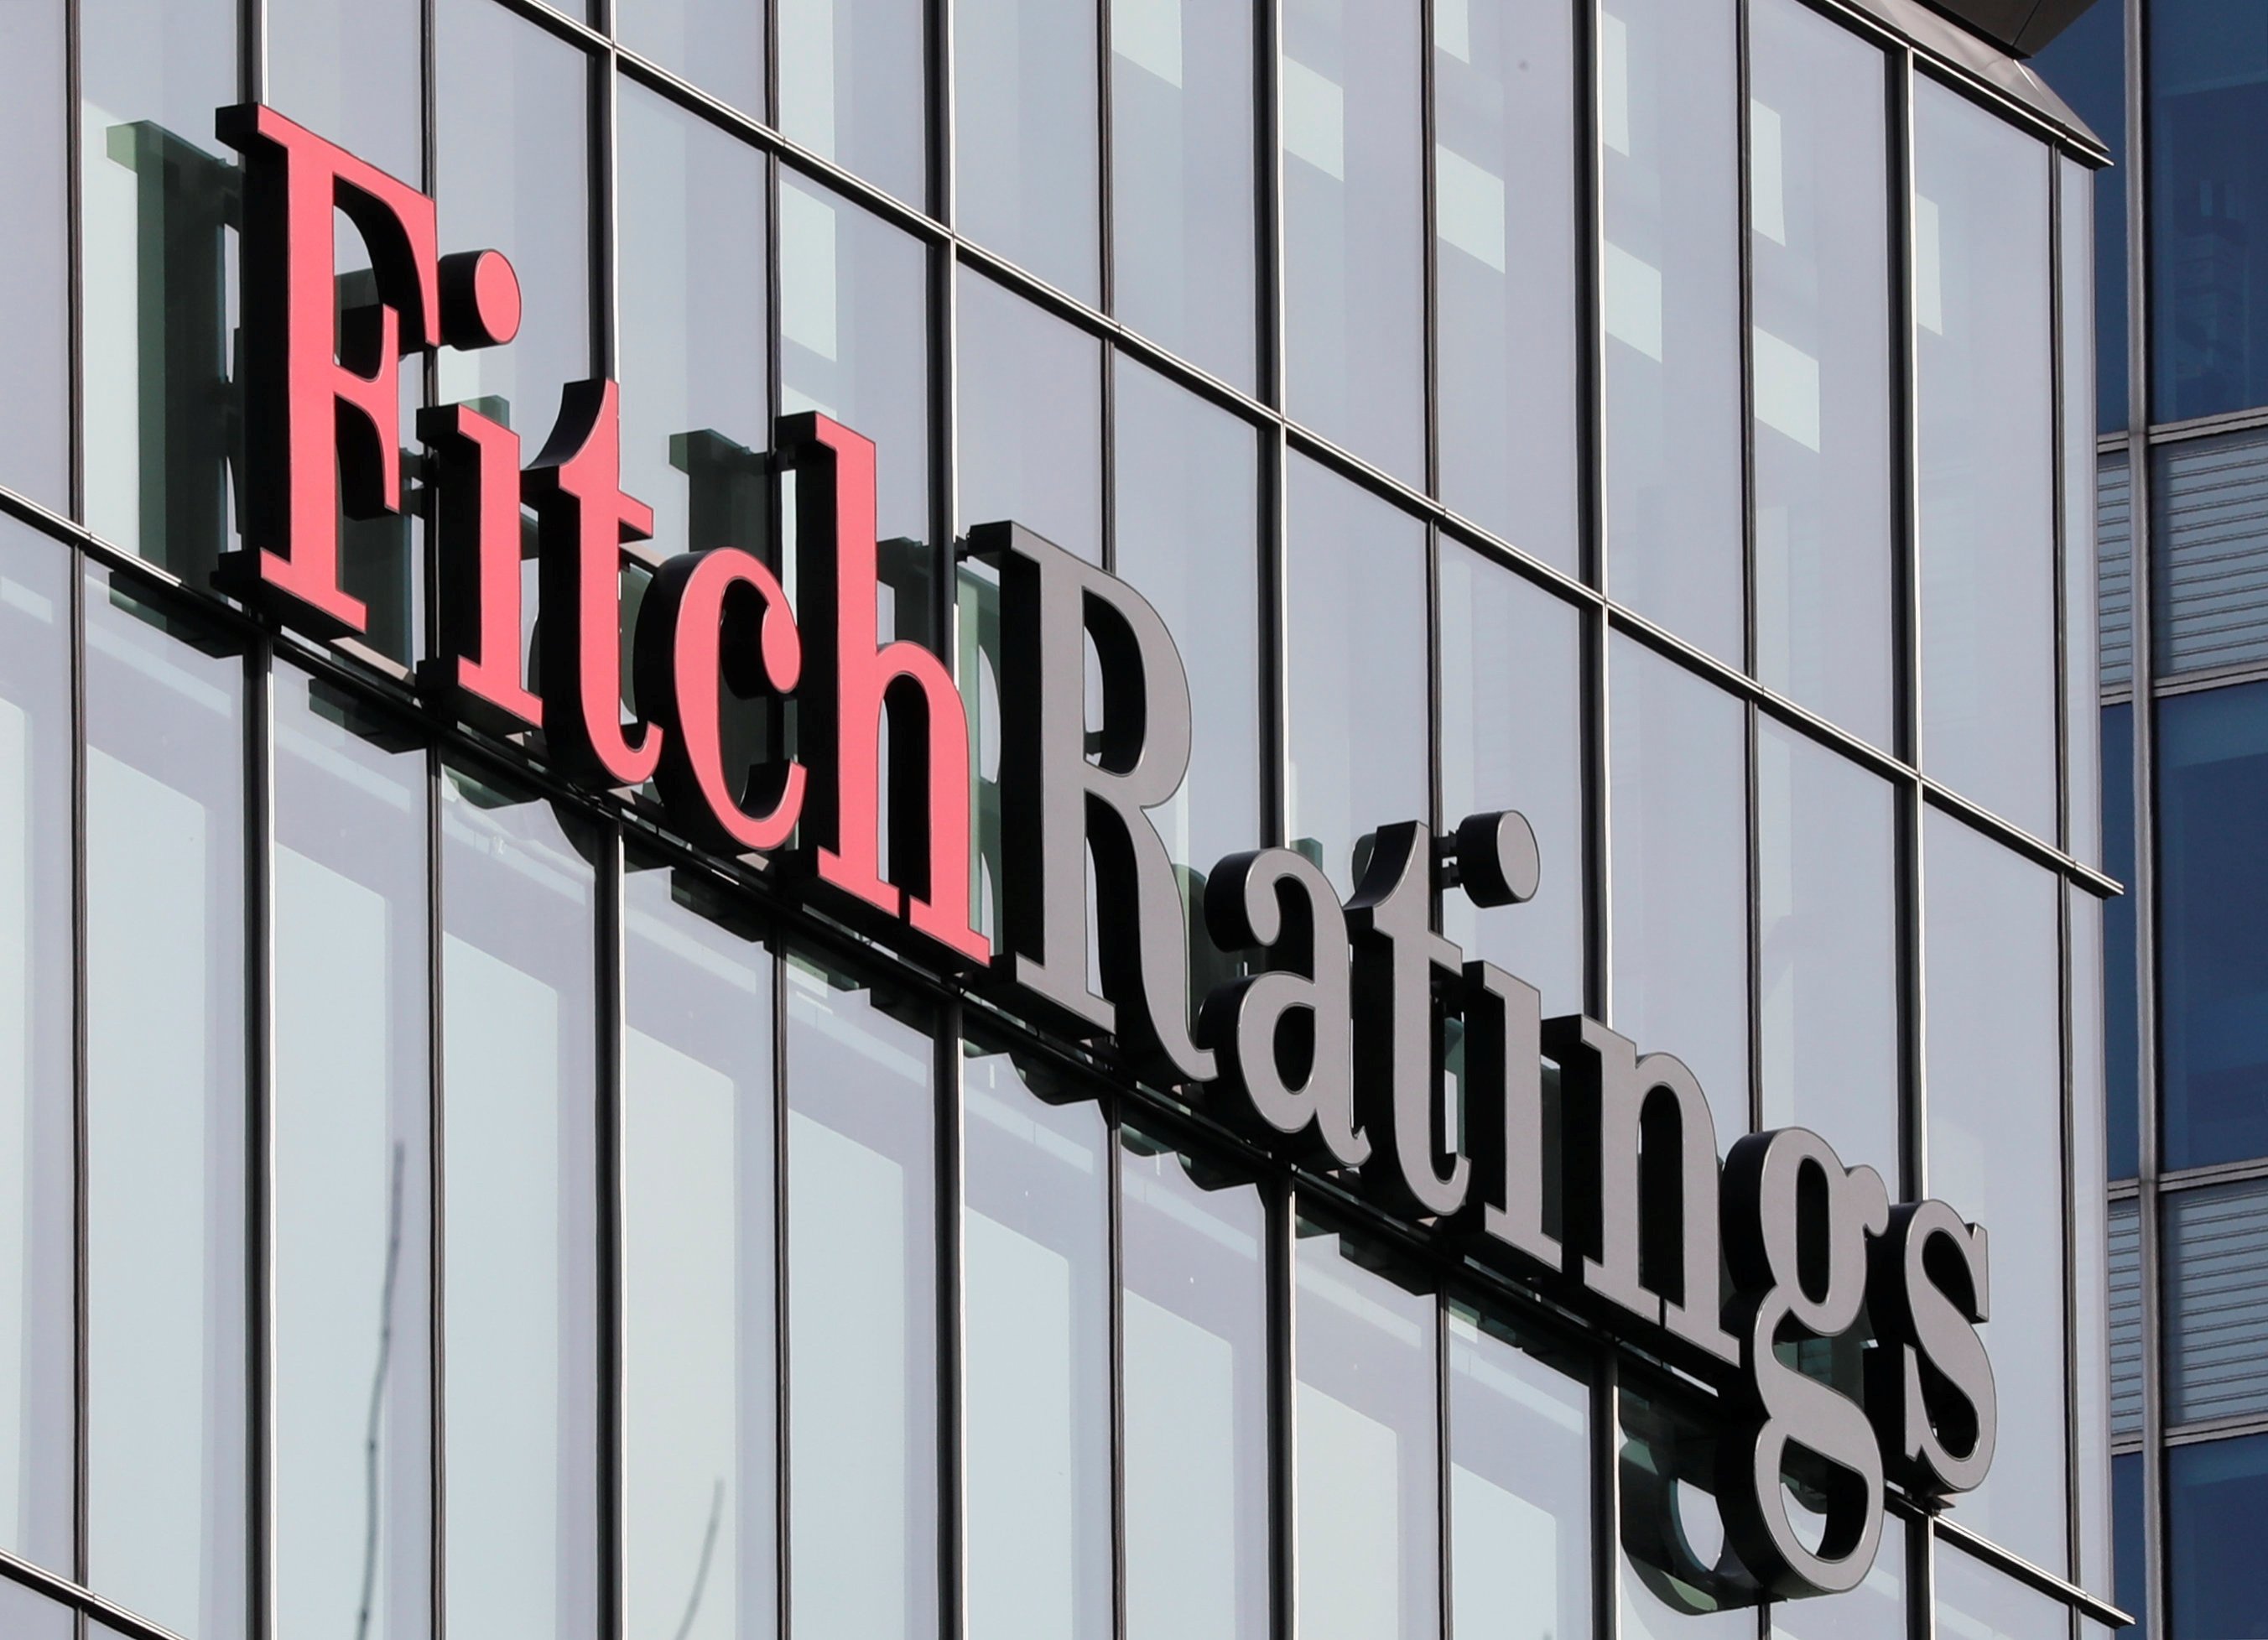 Fitch agency provides forecast on duration of Russia-Ukraine war and assessed Ukraine's financial resilience